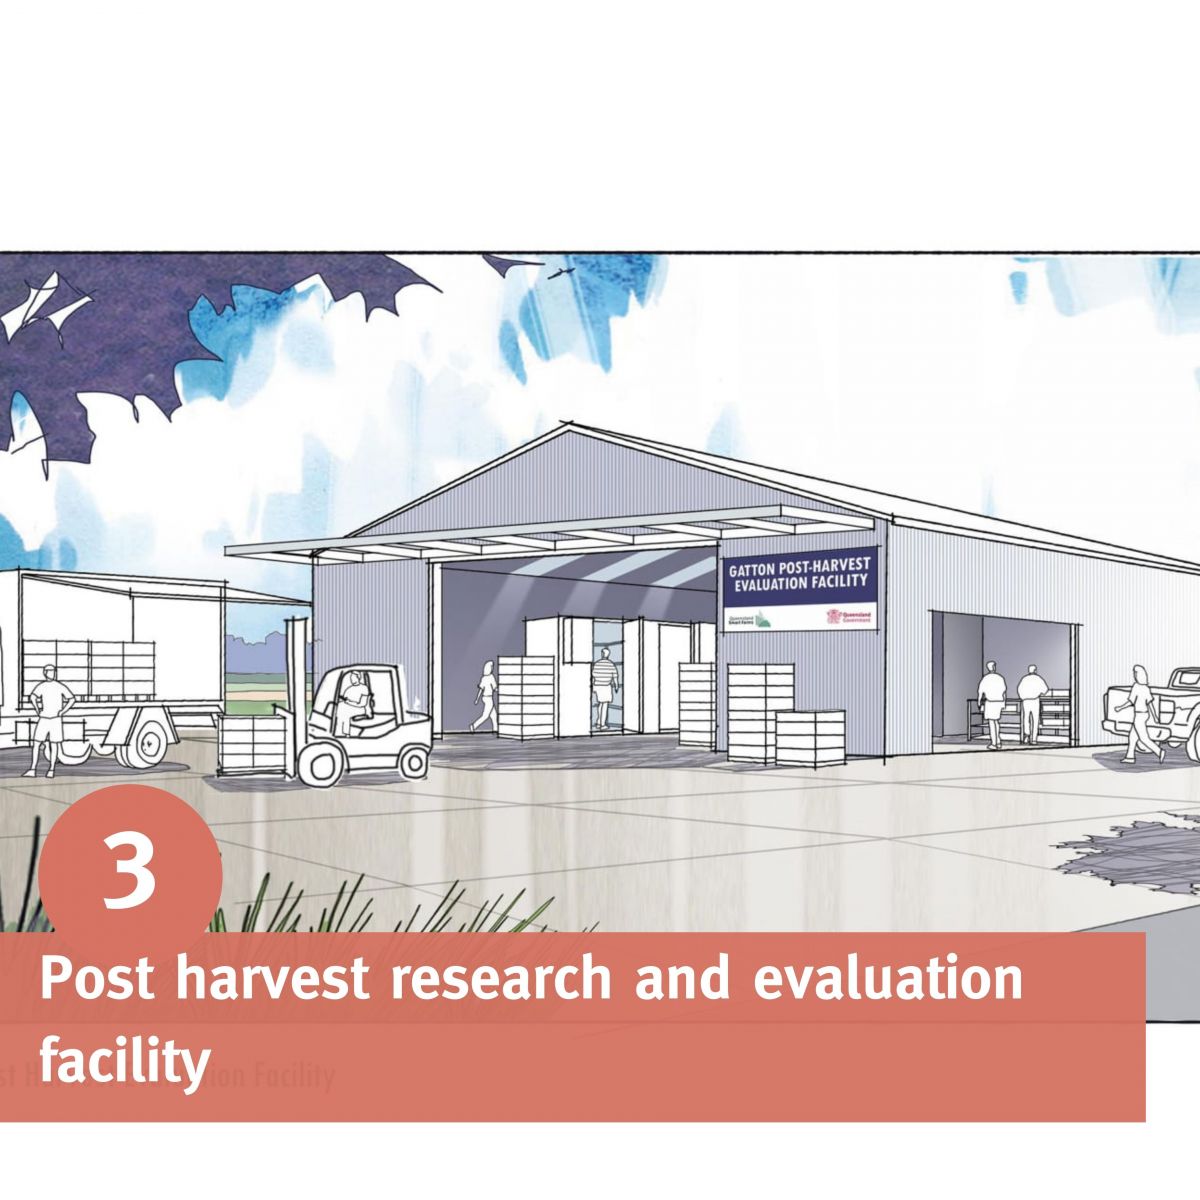 Post harvest research and evaluation laboratory